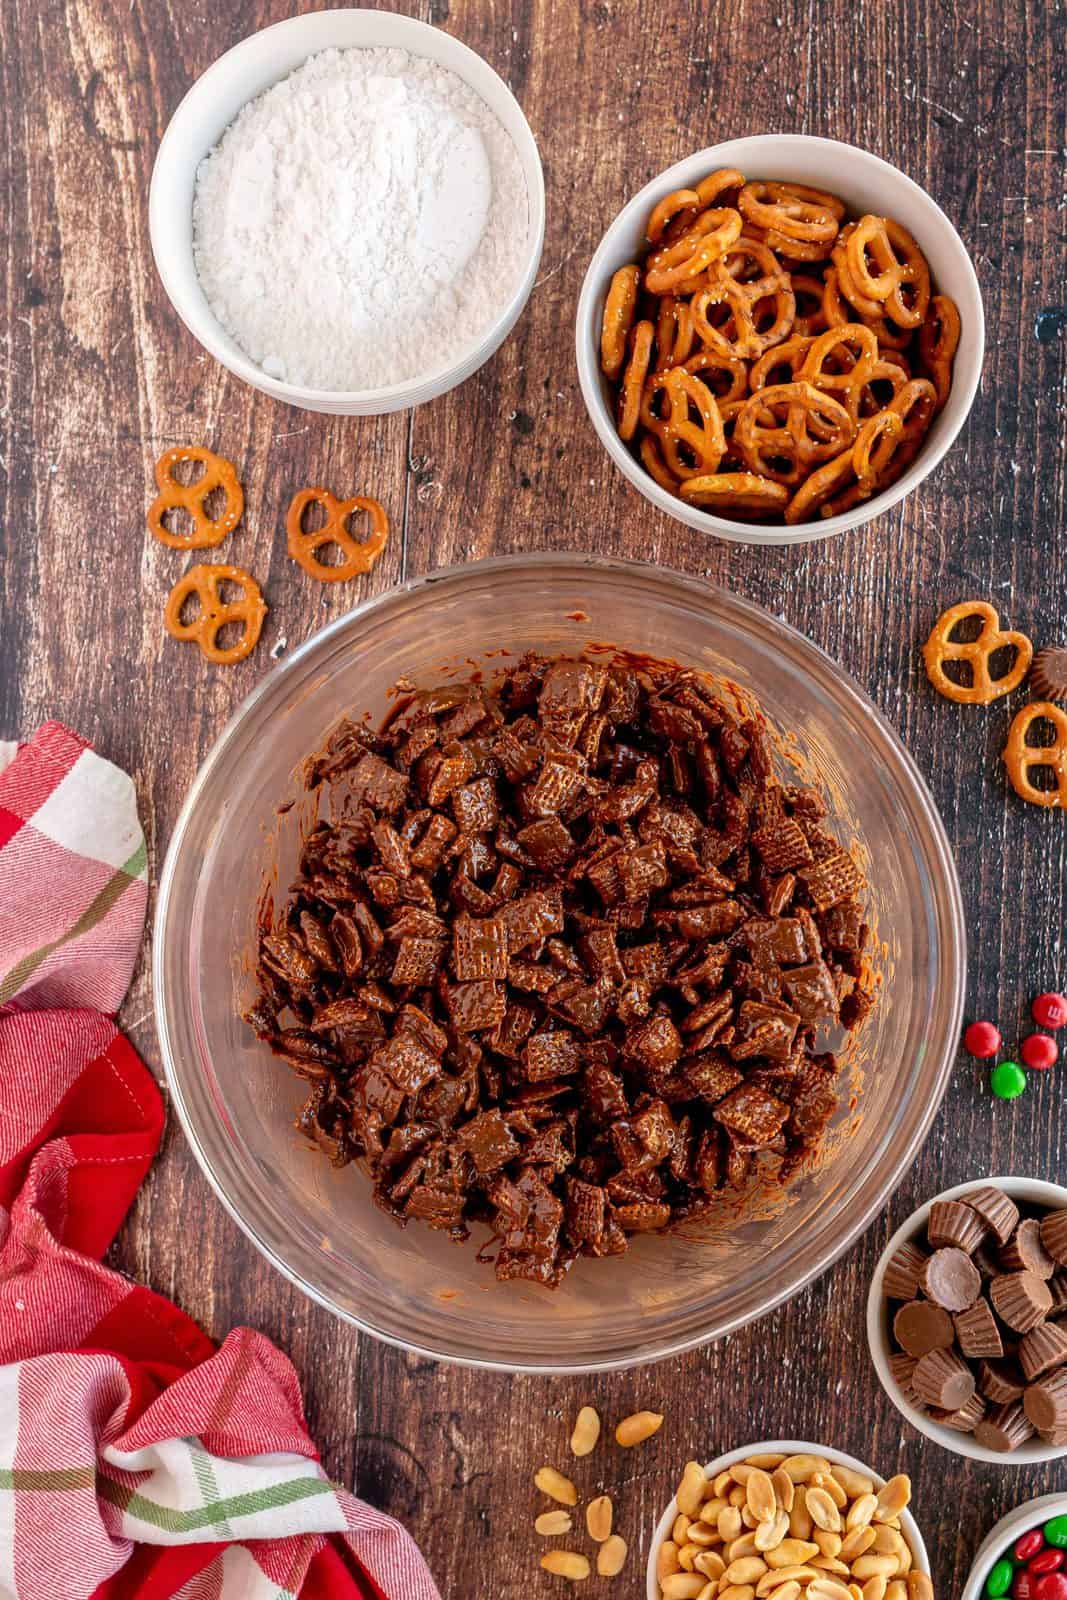 Chocolate mixture poured over chex cereal in bowl and stirred together.